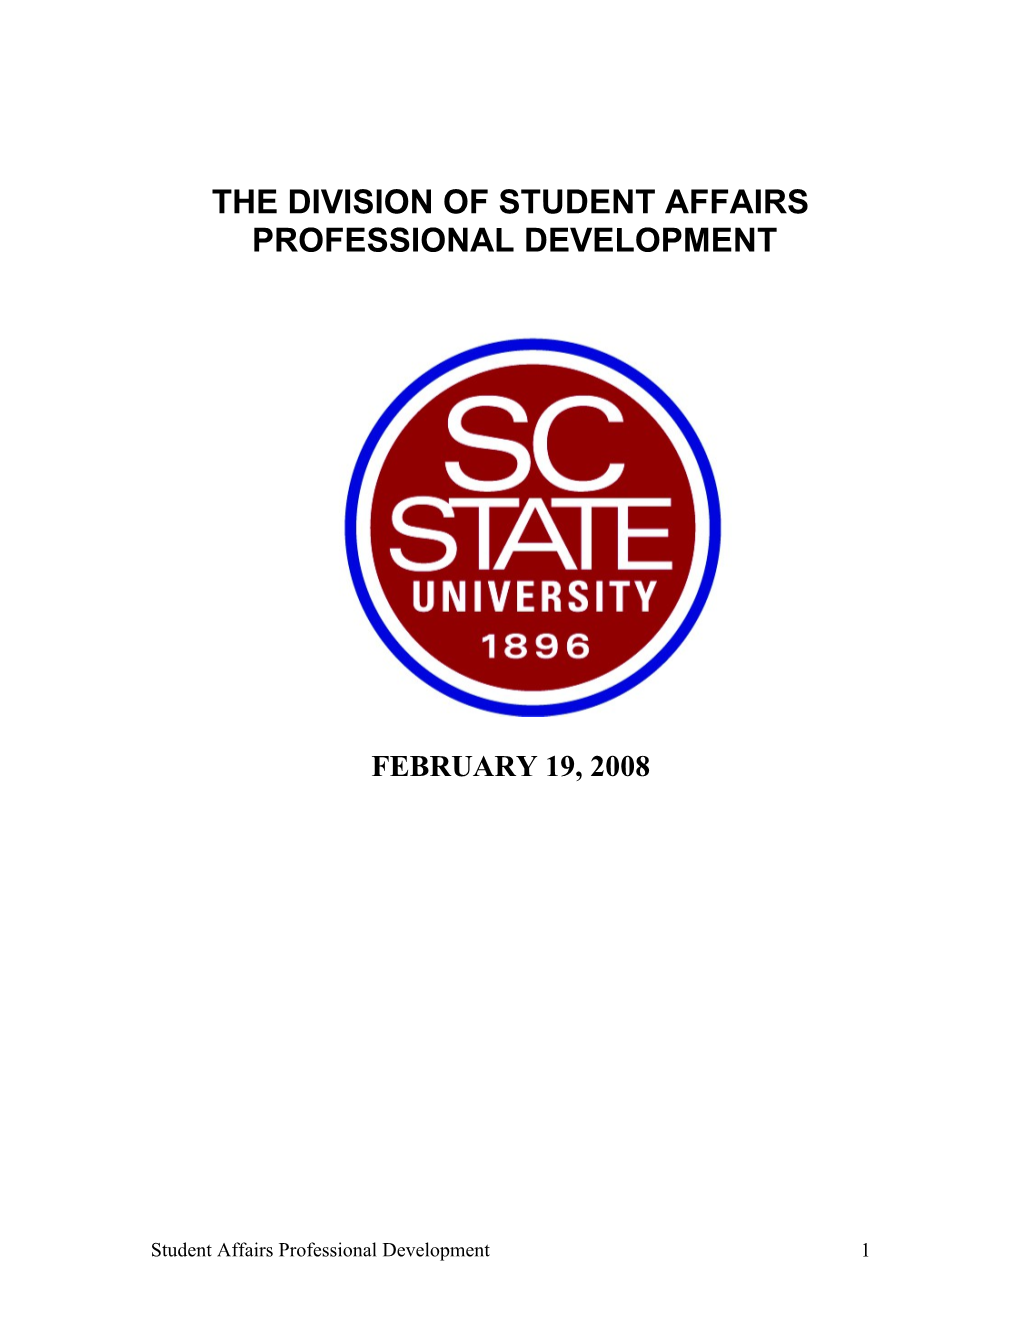 The Division of Student Affairs